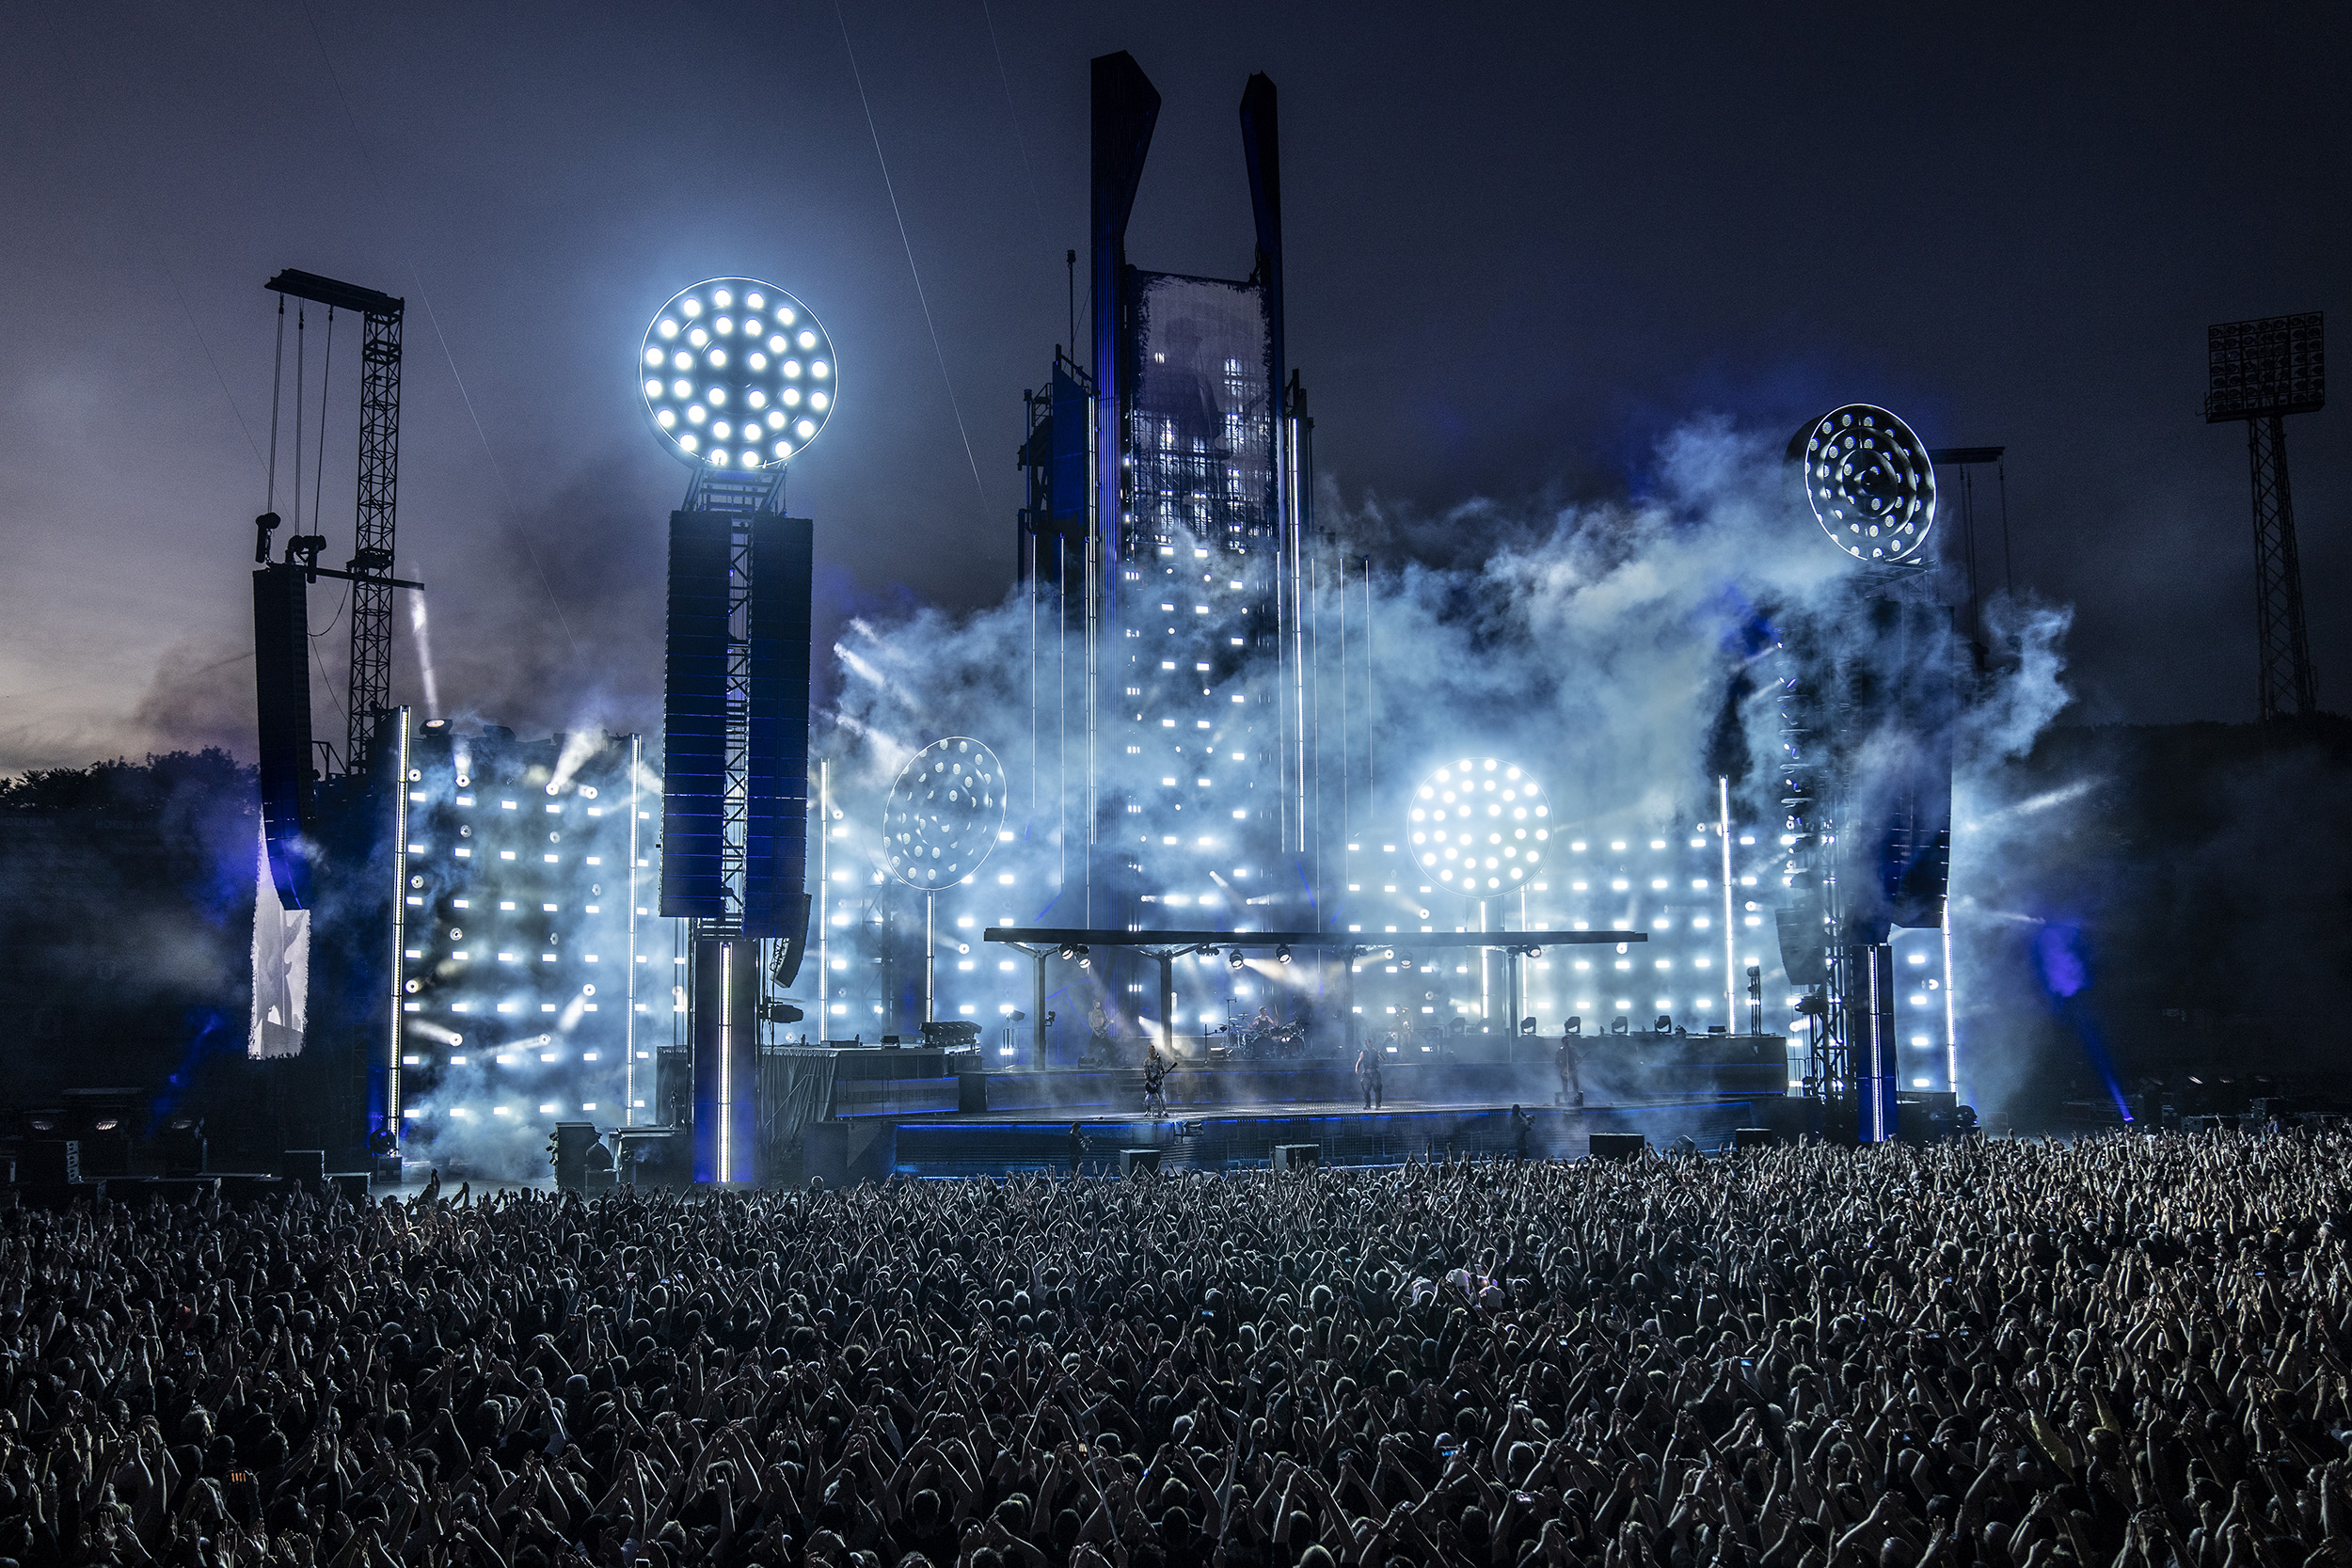 rammstein-on-stage-at-night-lit-in-blue.jpeg